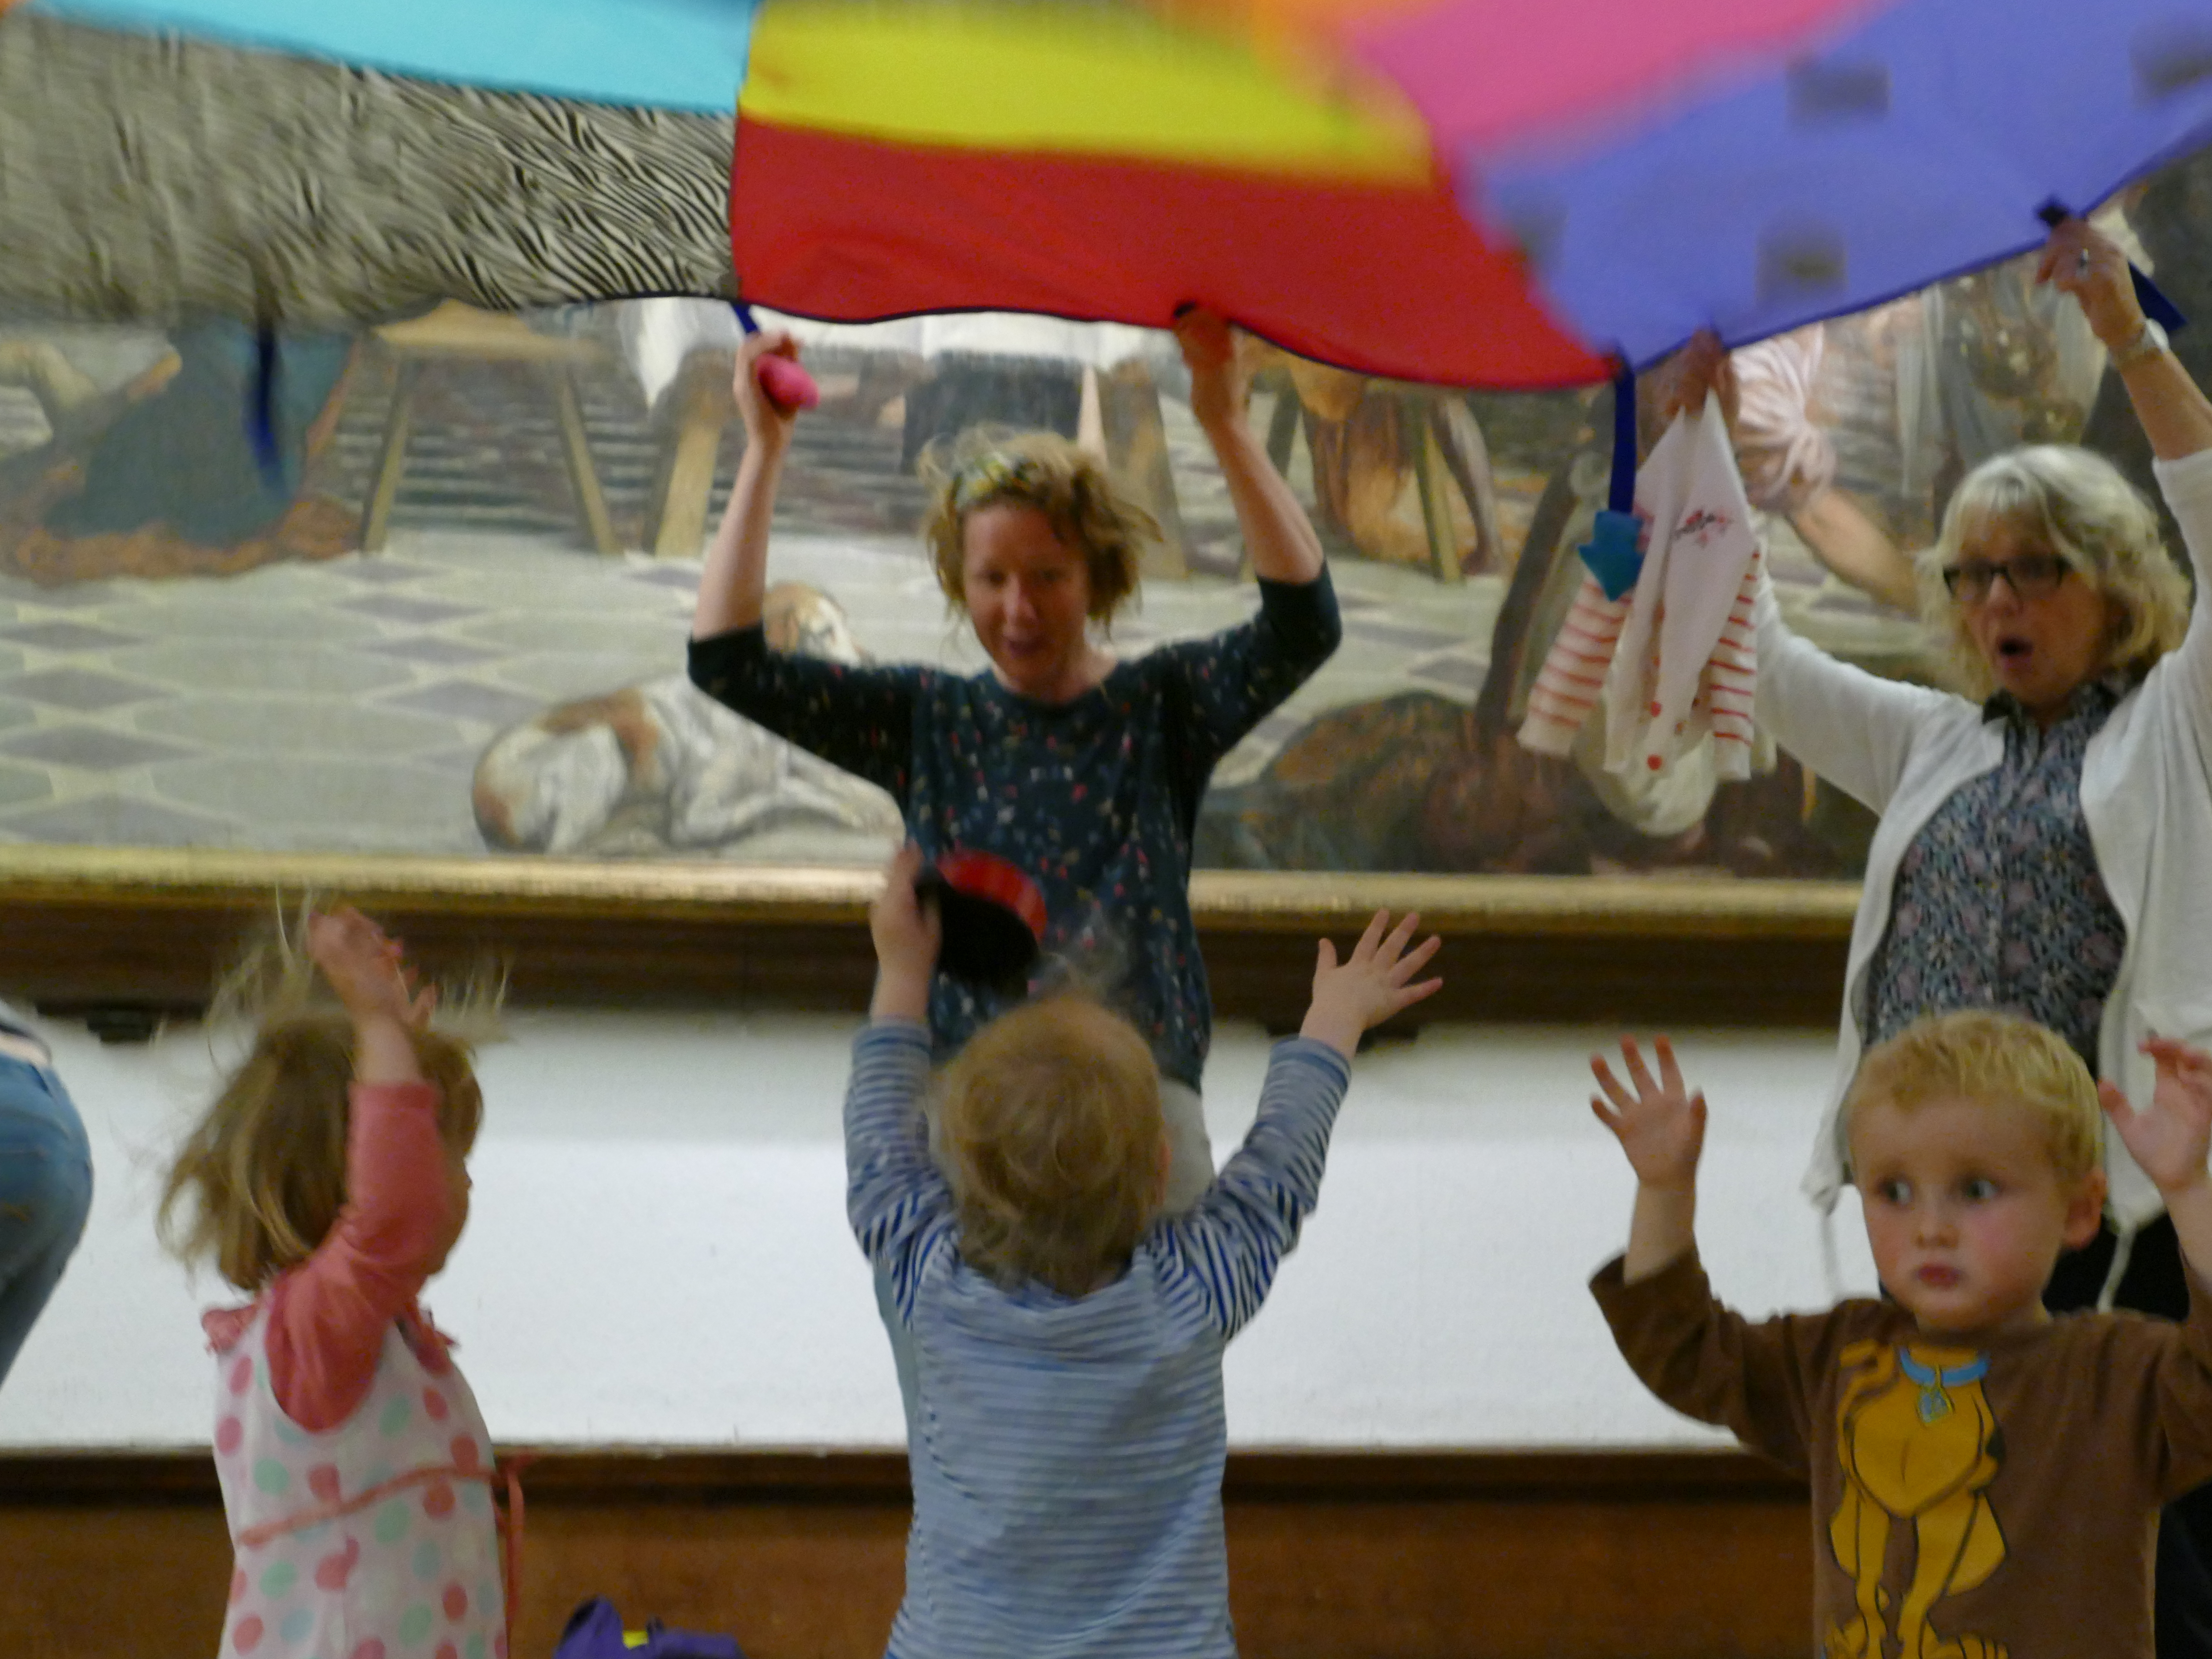 Parachute games in front of the Tintoretto